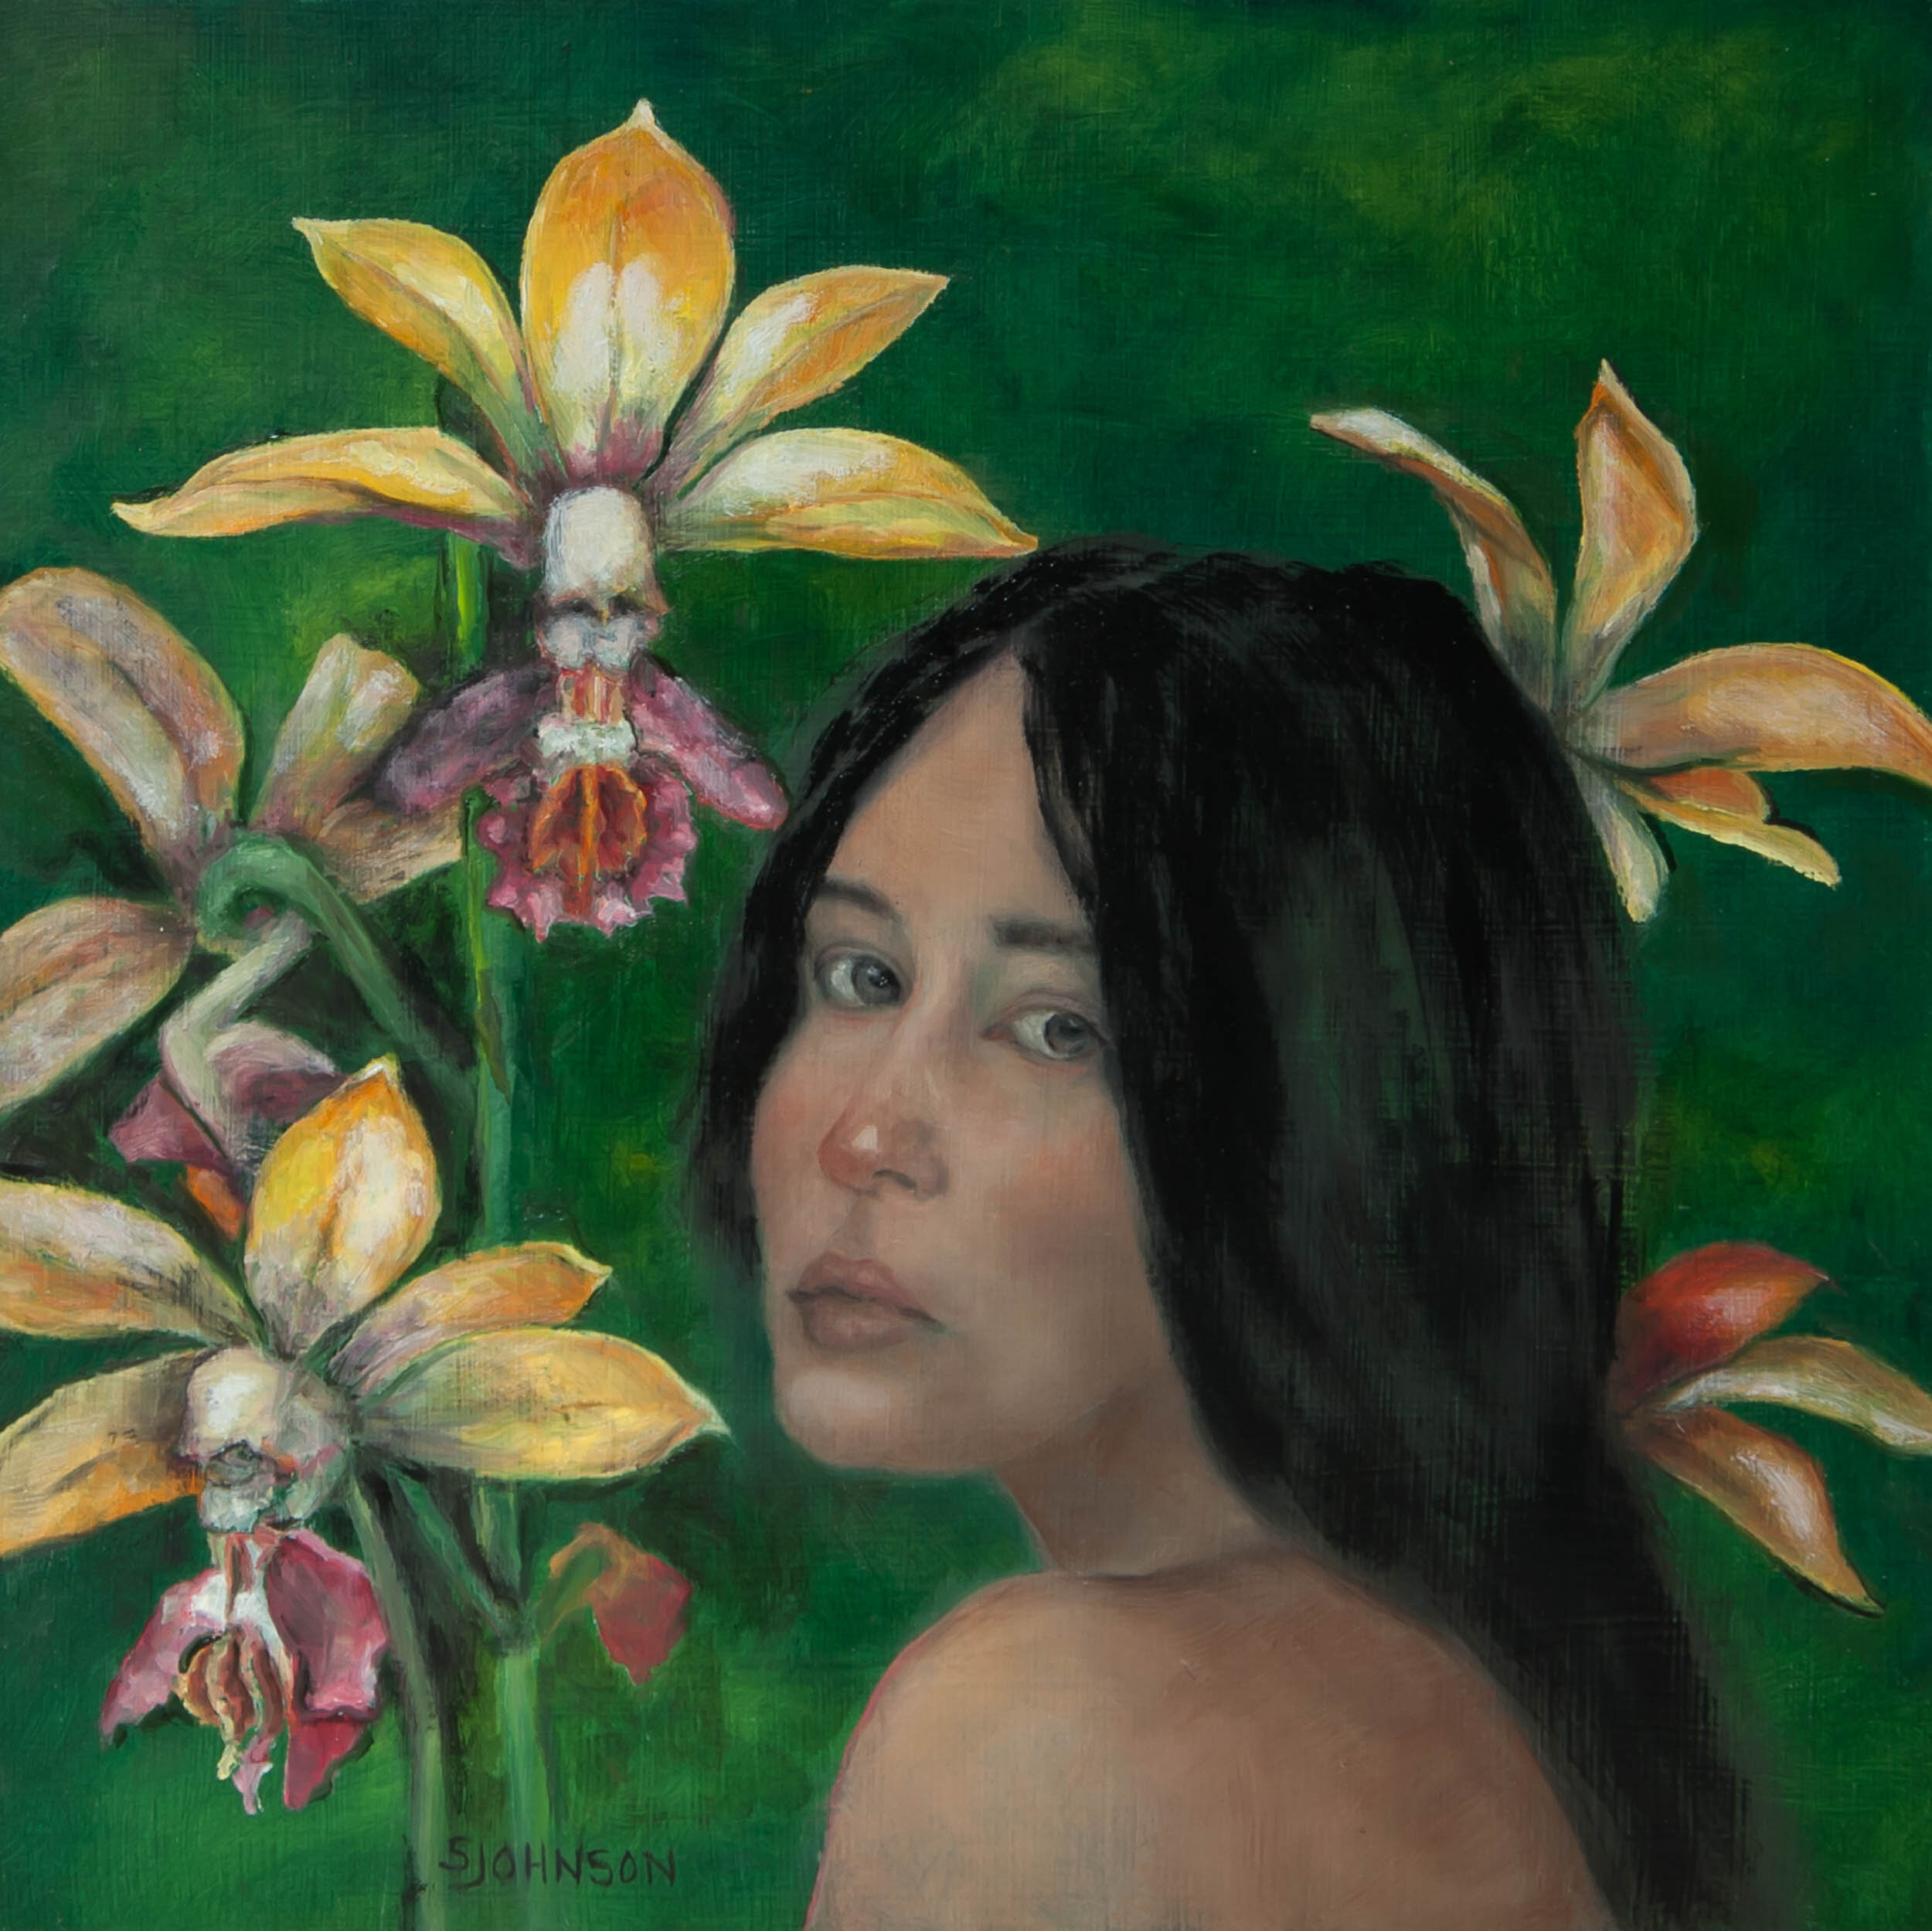 The Orchid Keeper